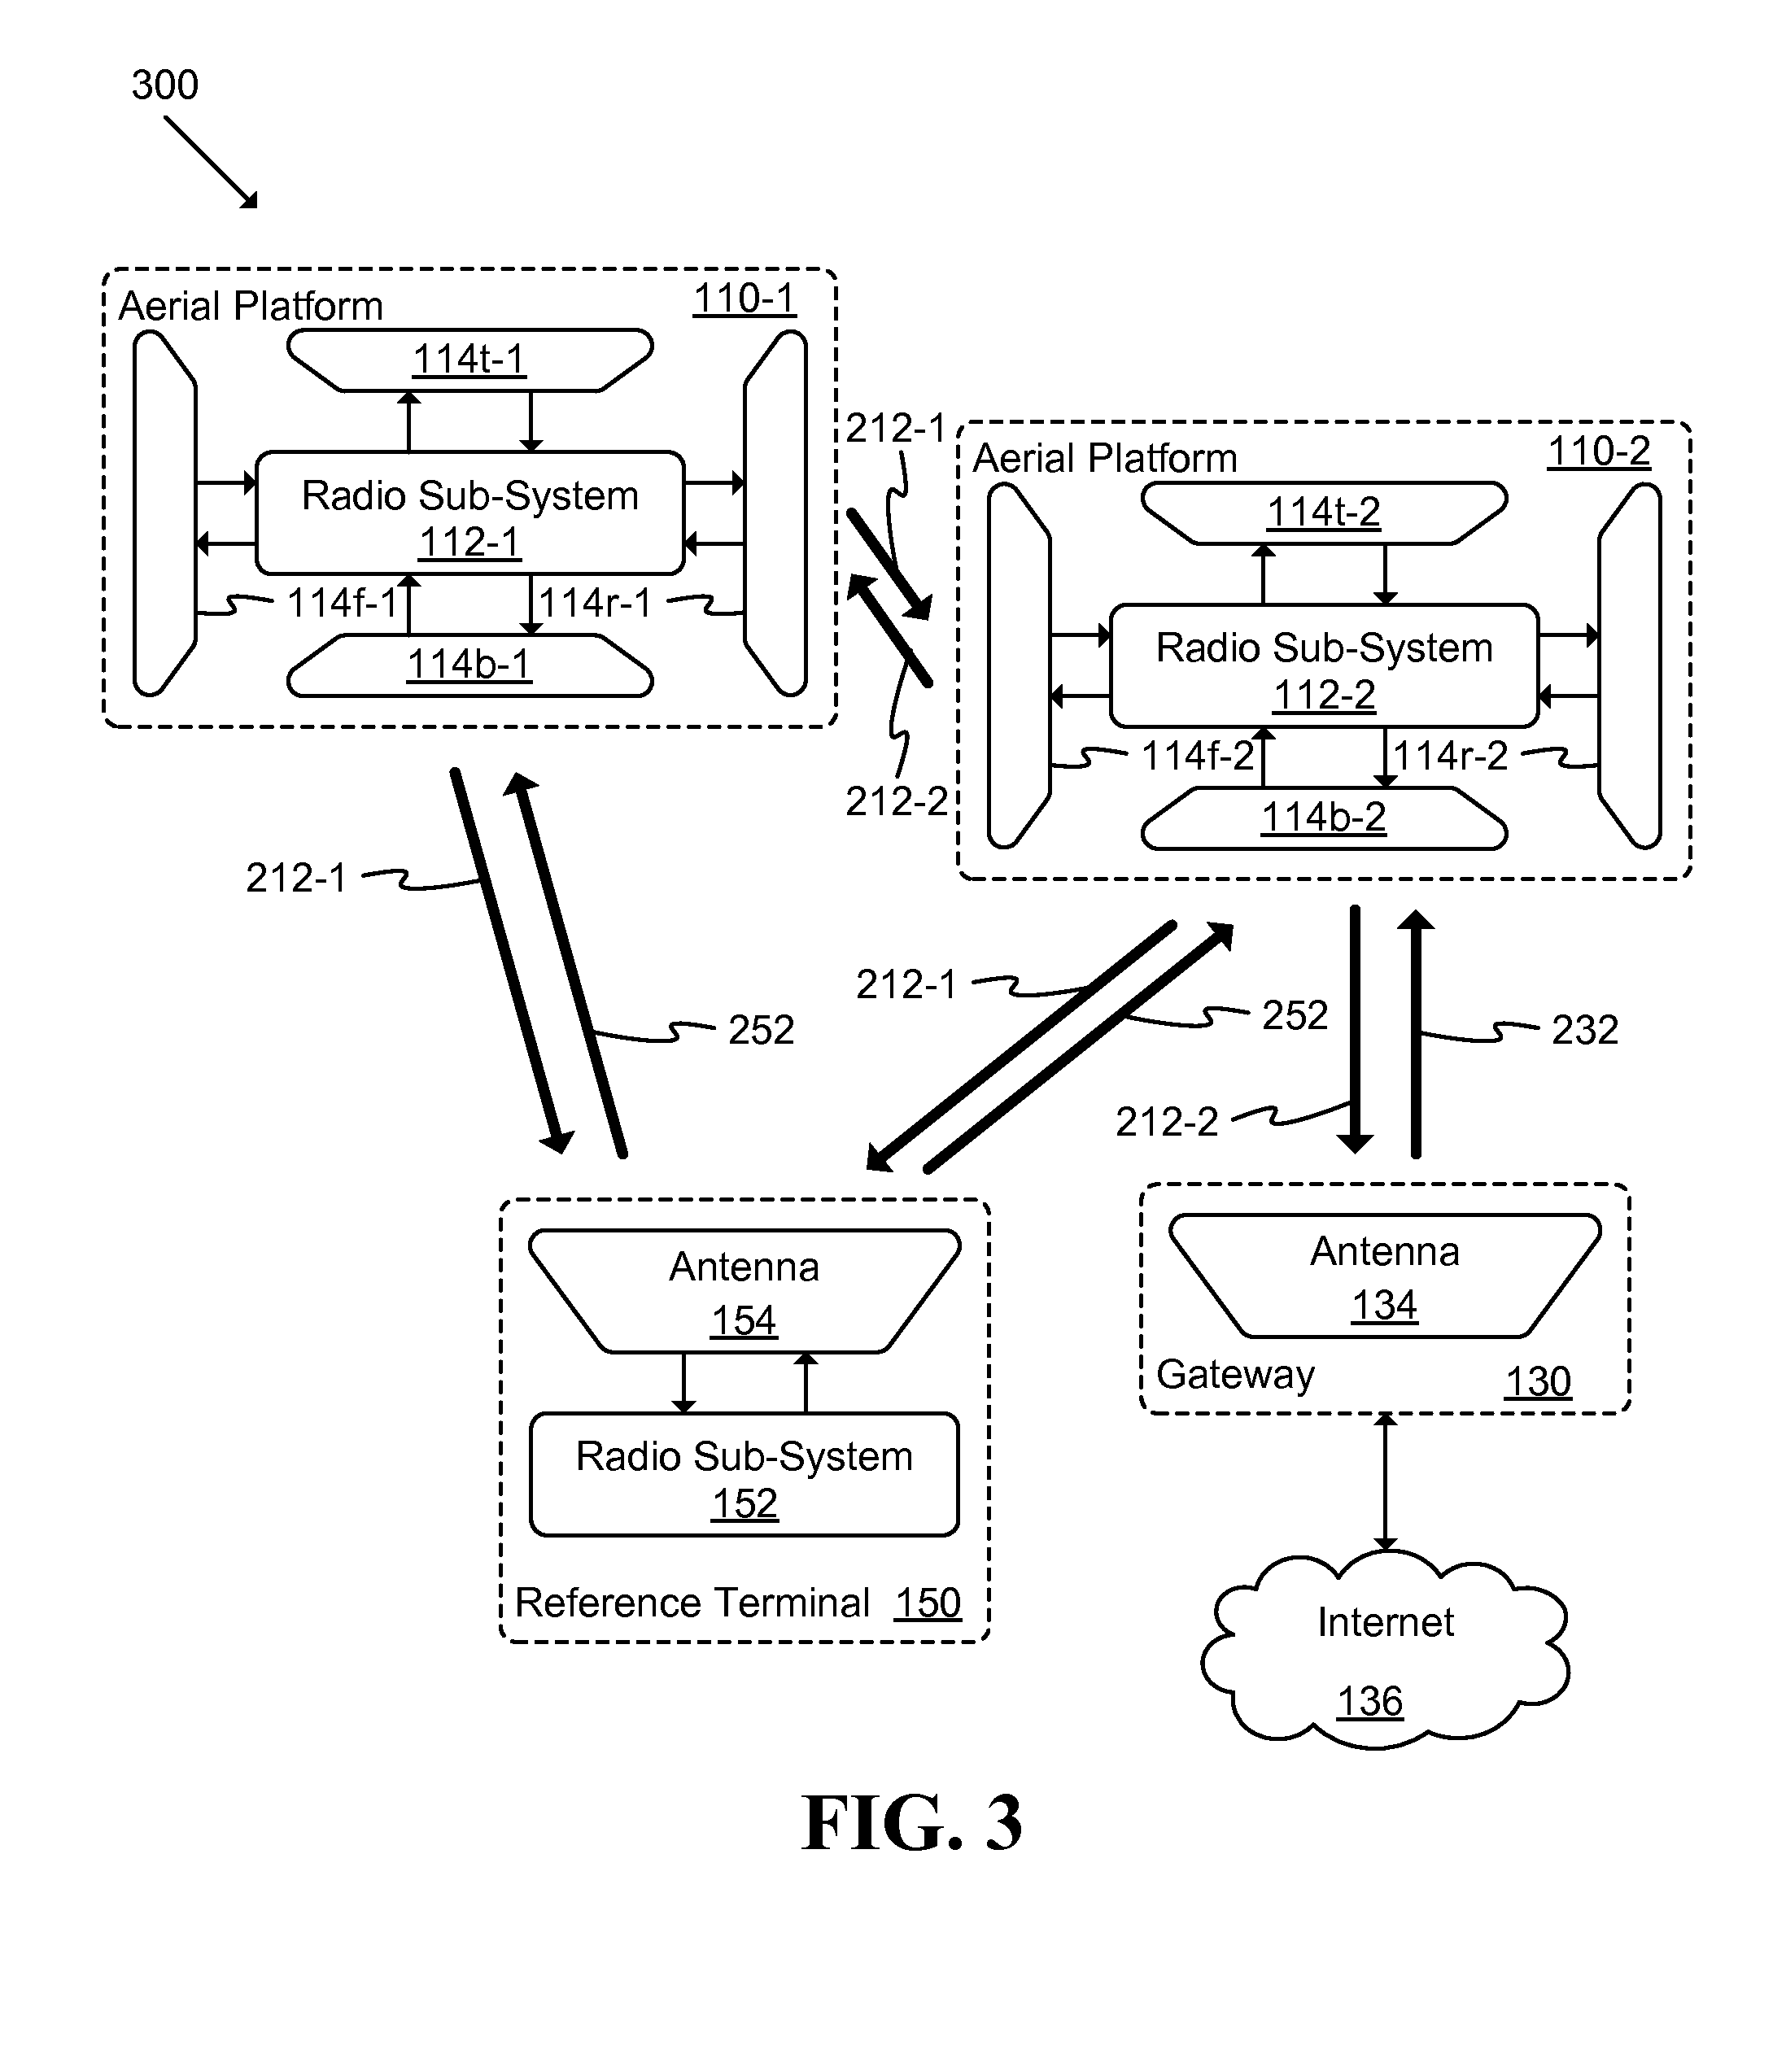 Unmanned Aerial Vehicle Communication Using Distributed Antenna Placement and Beam Pointing